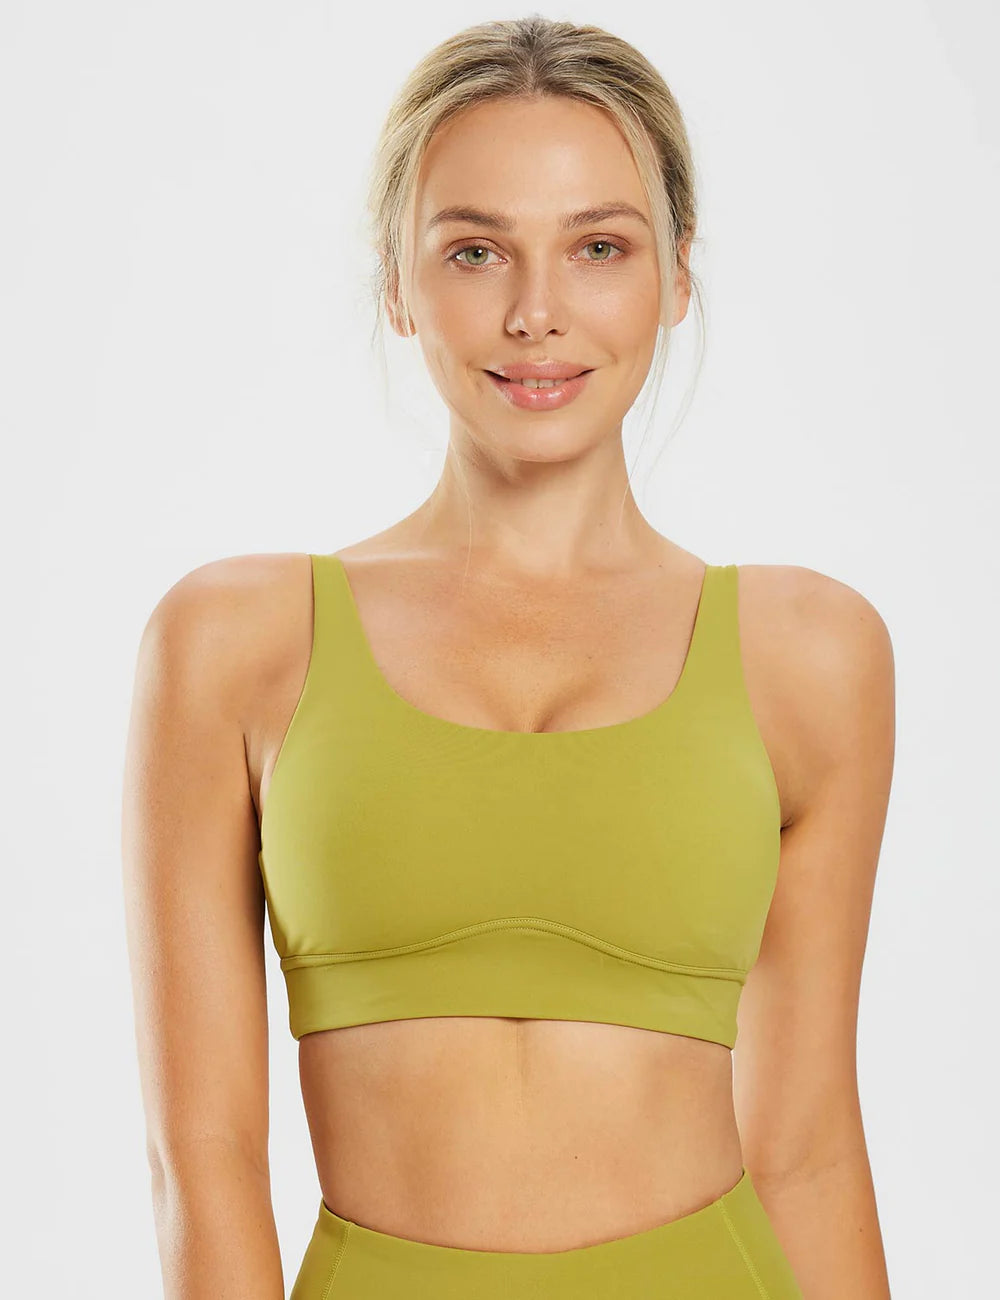 Discover Your Perfect Fit: A Guide to Know Your Sports Bra Size